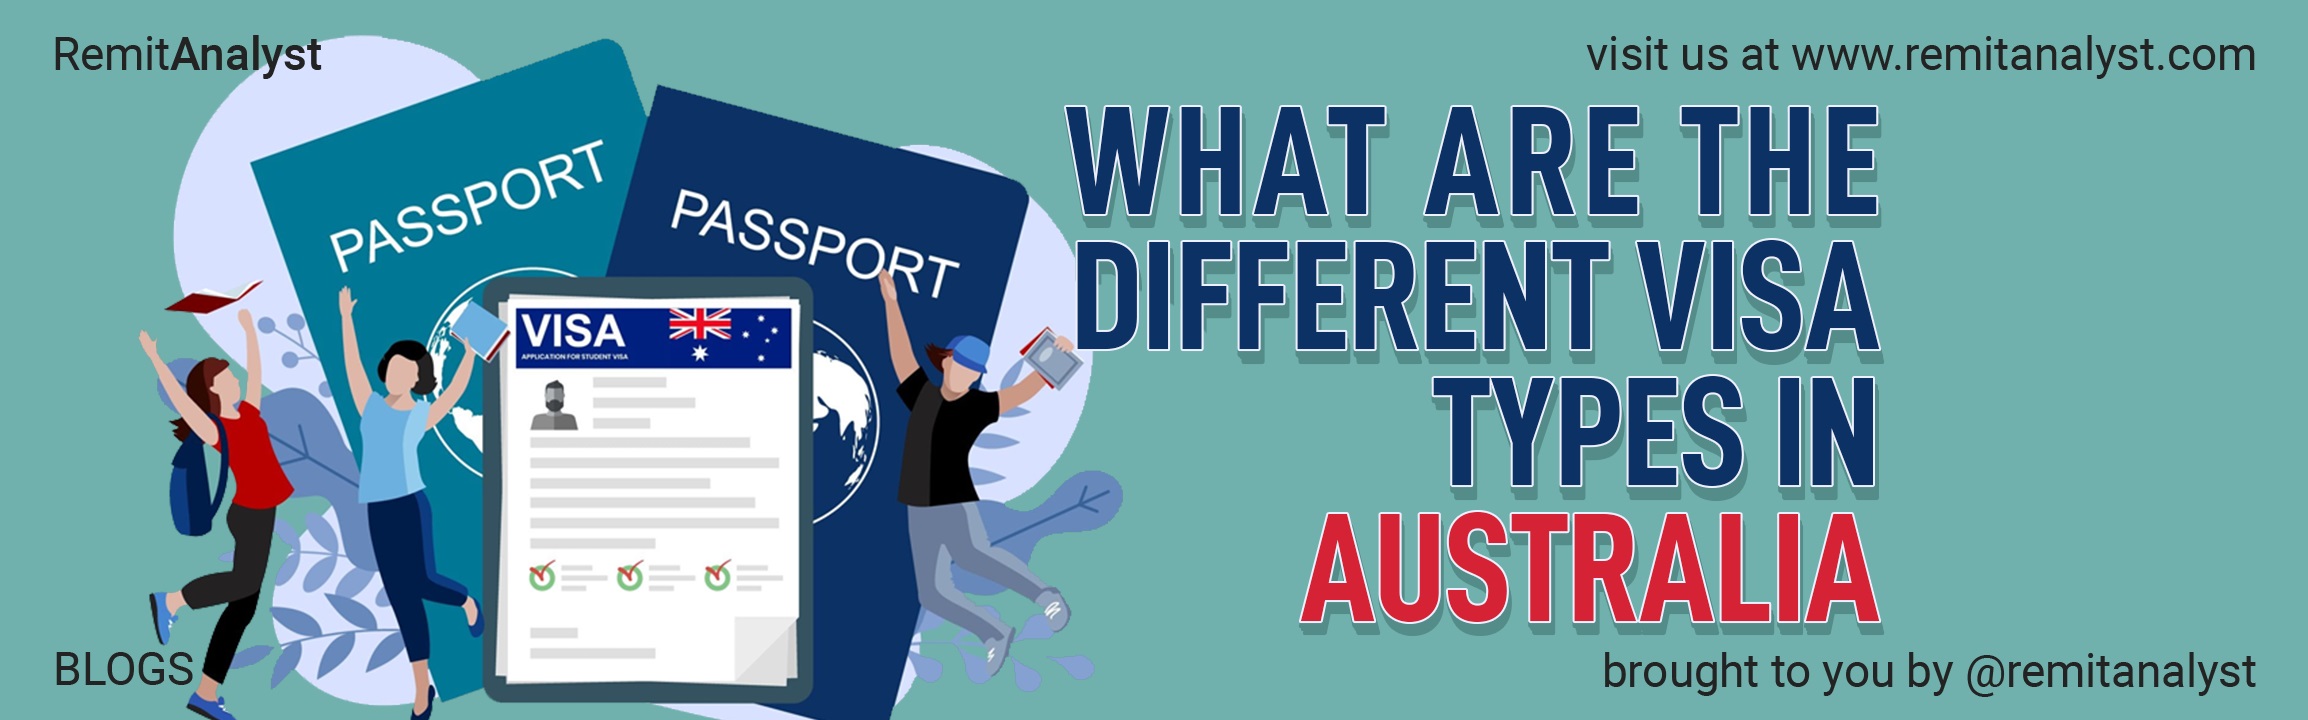 what-are-the-different-visa-types-in-australia-title.jpg